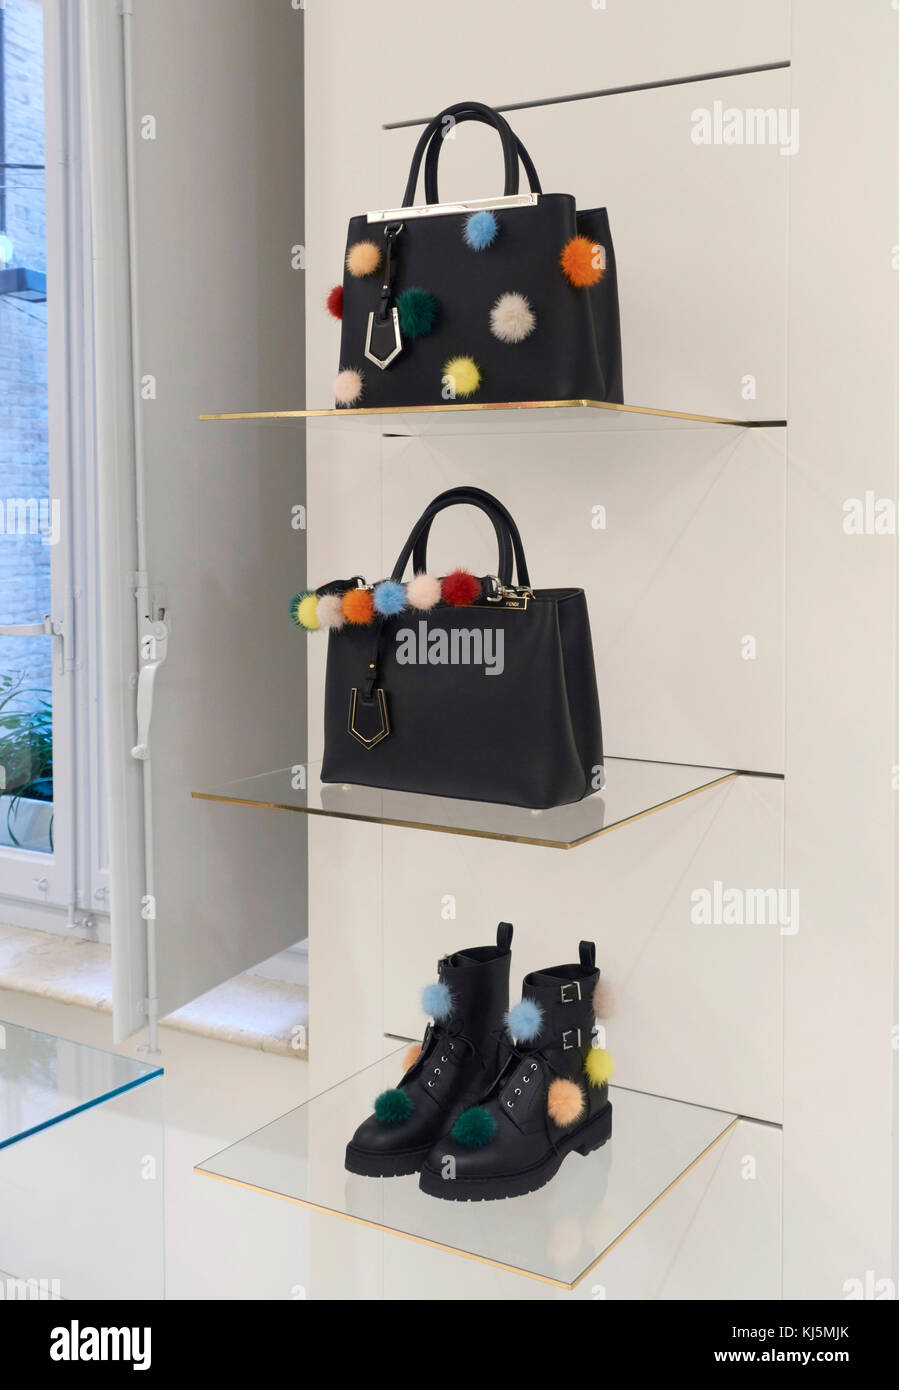 Fendi bags and shoes with pon pon on the shelves of a fashion store Stock Photo